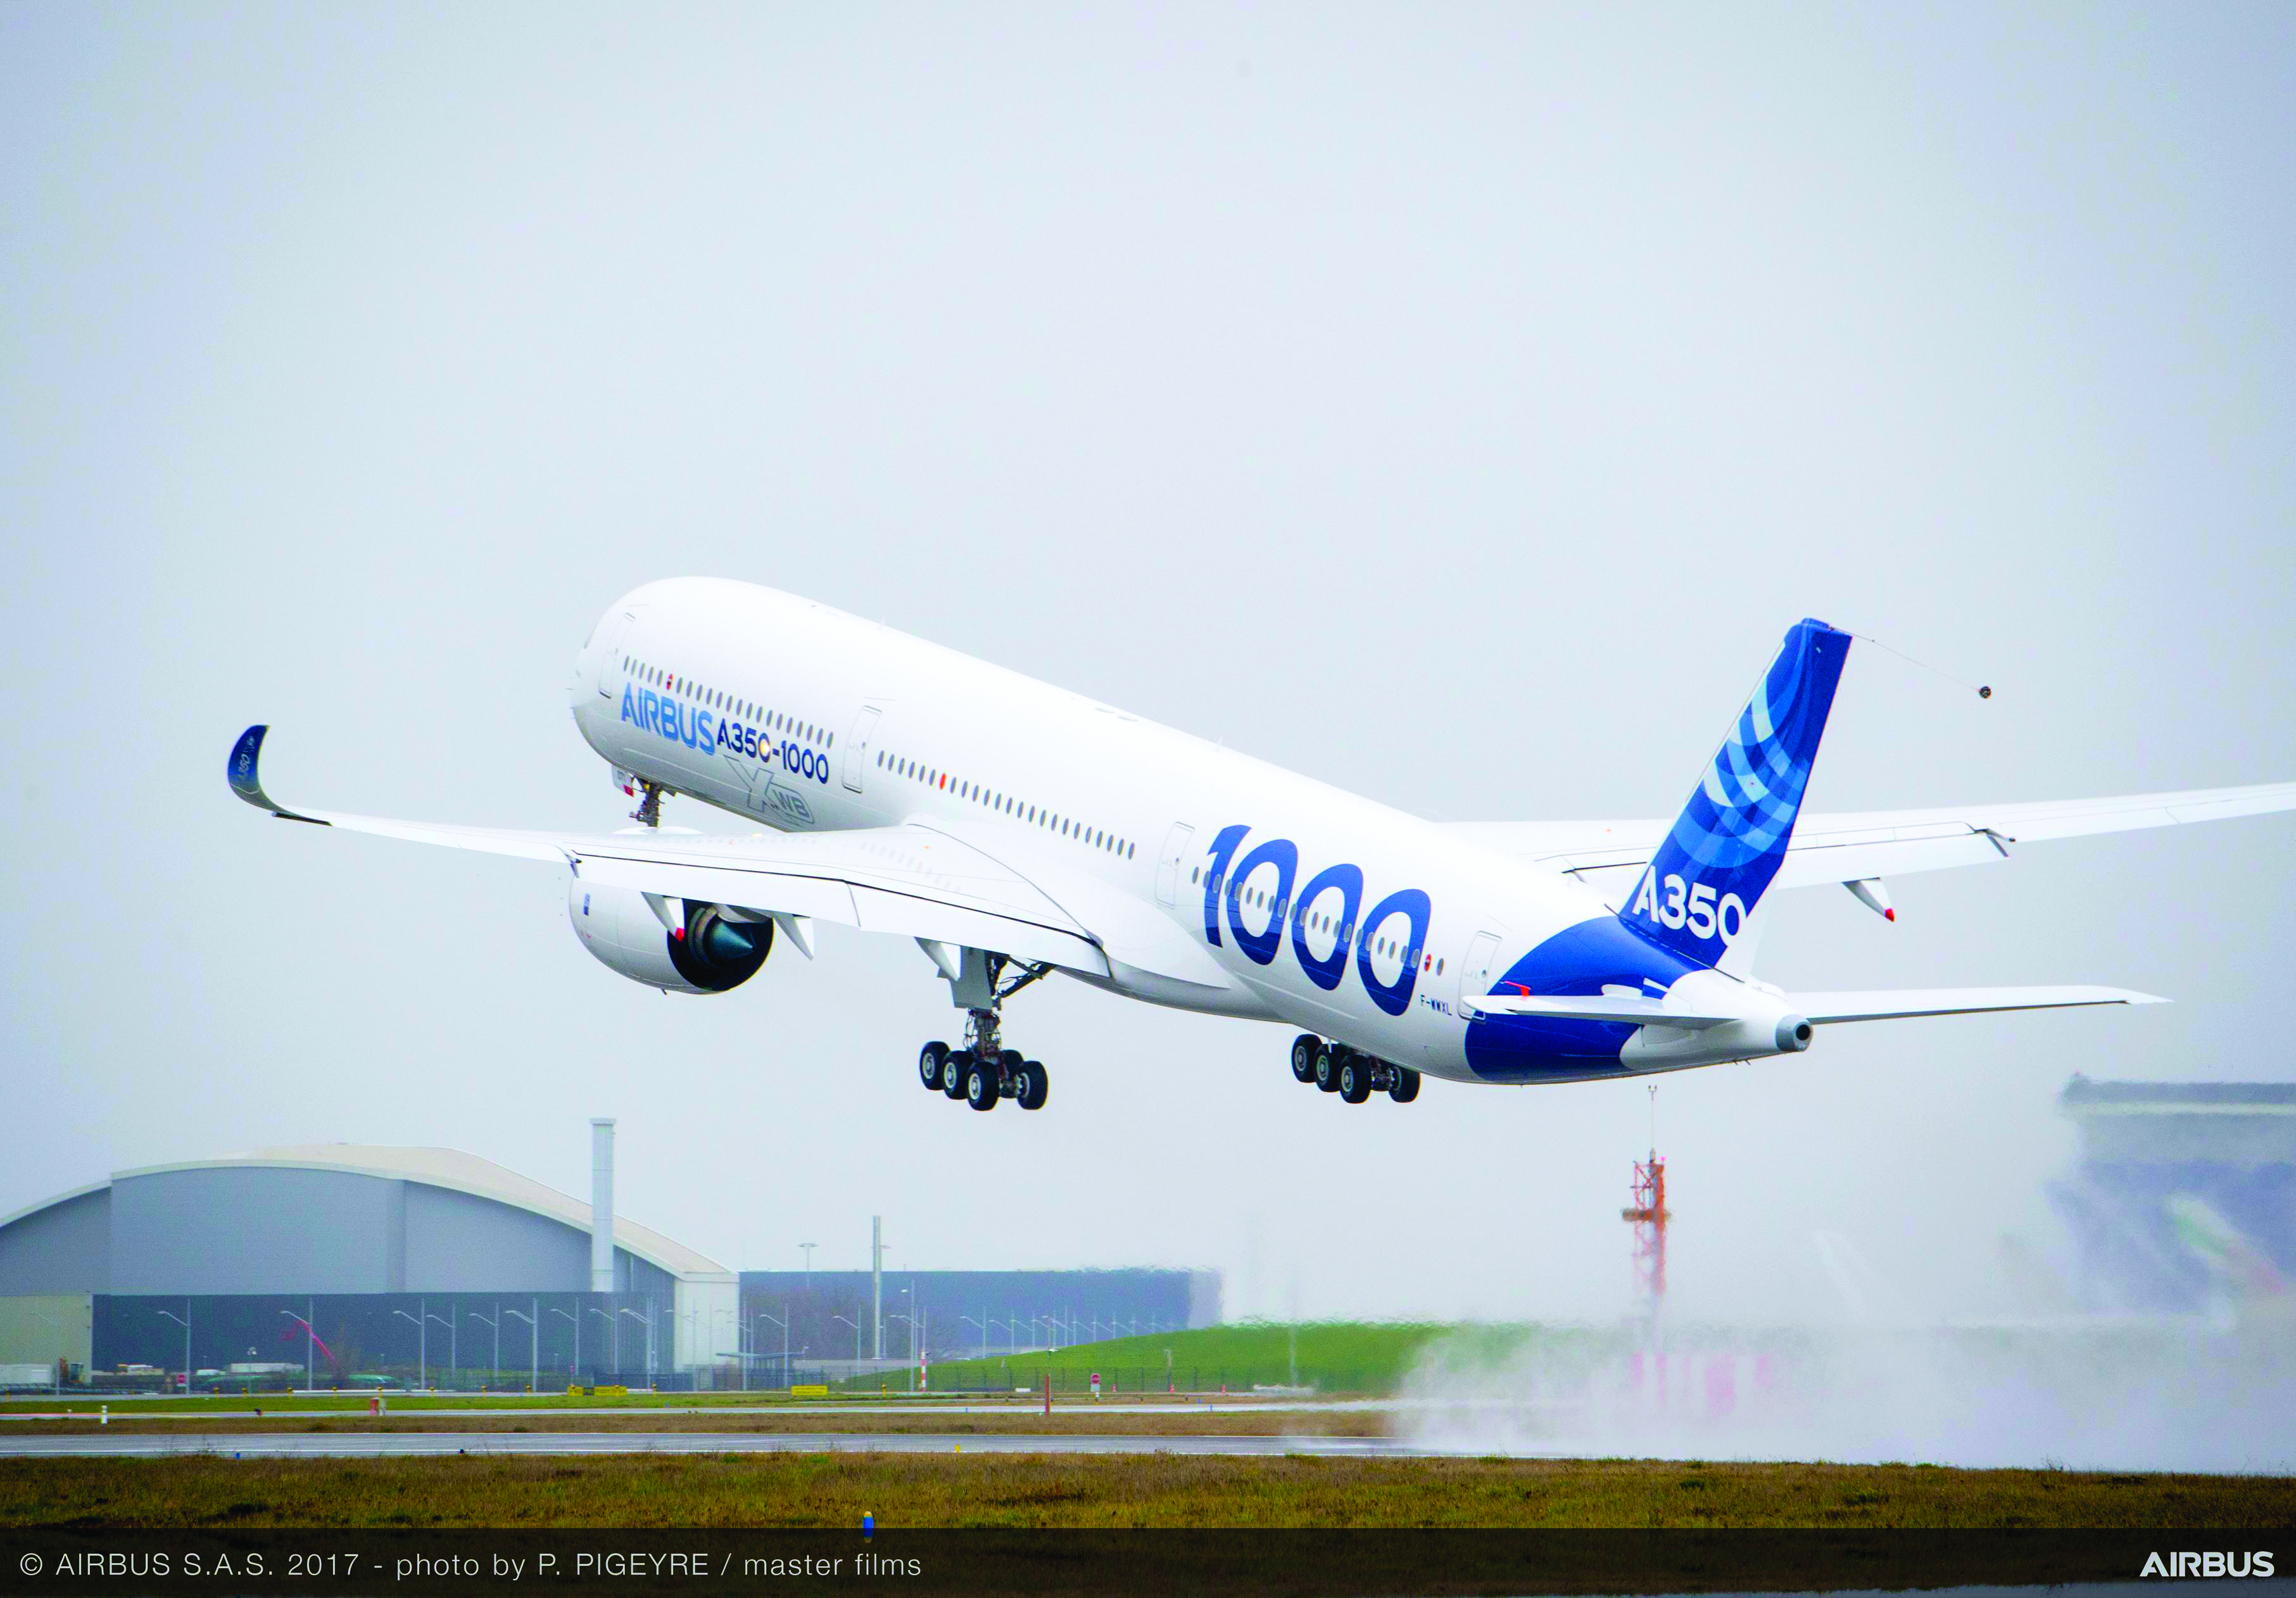 Airbus to deliver first A350-1000 plane by year-end